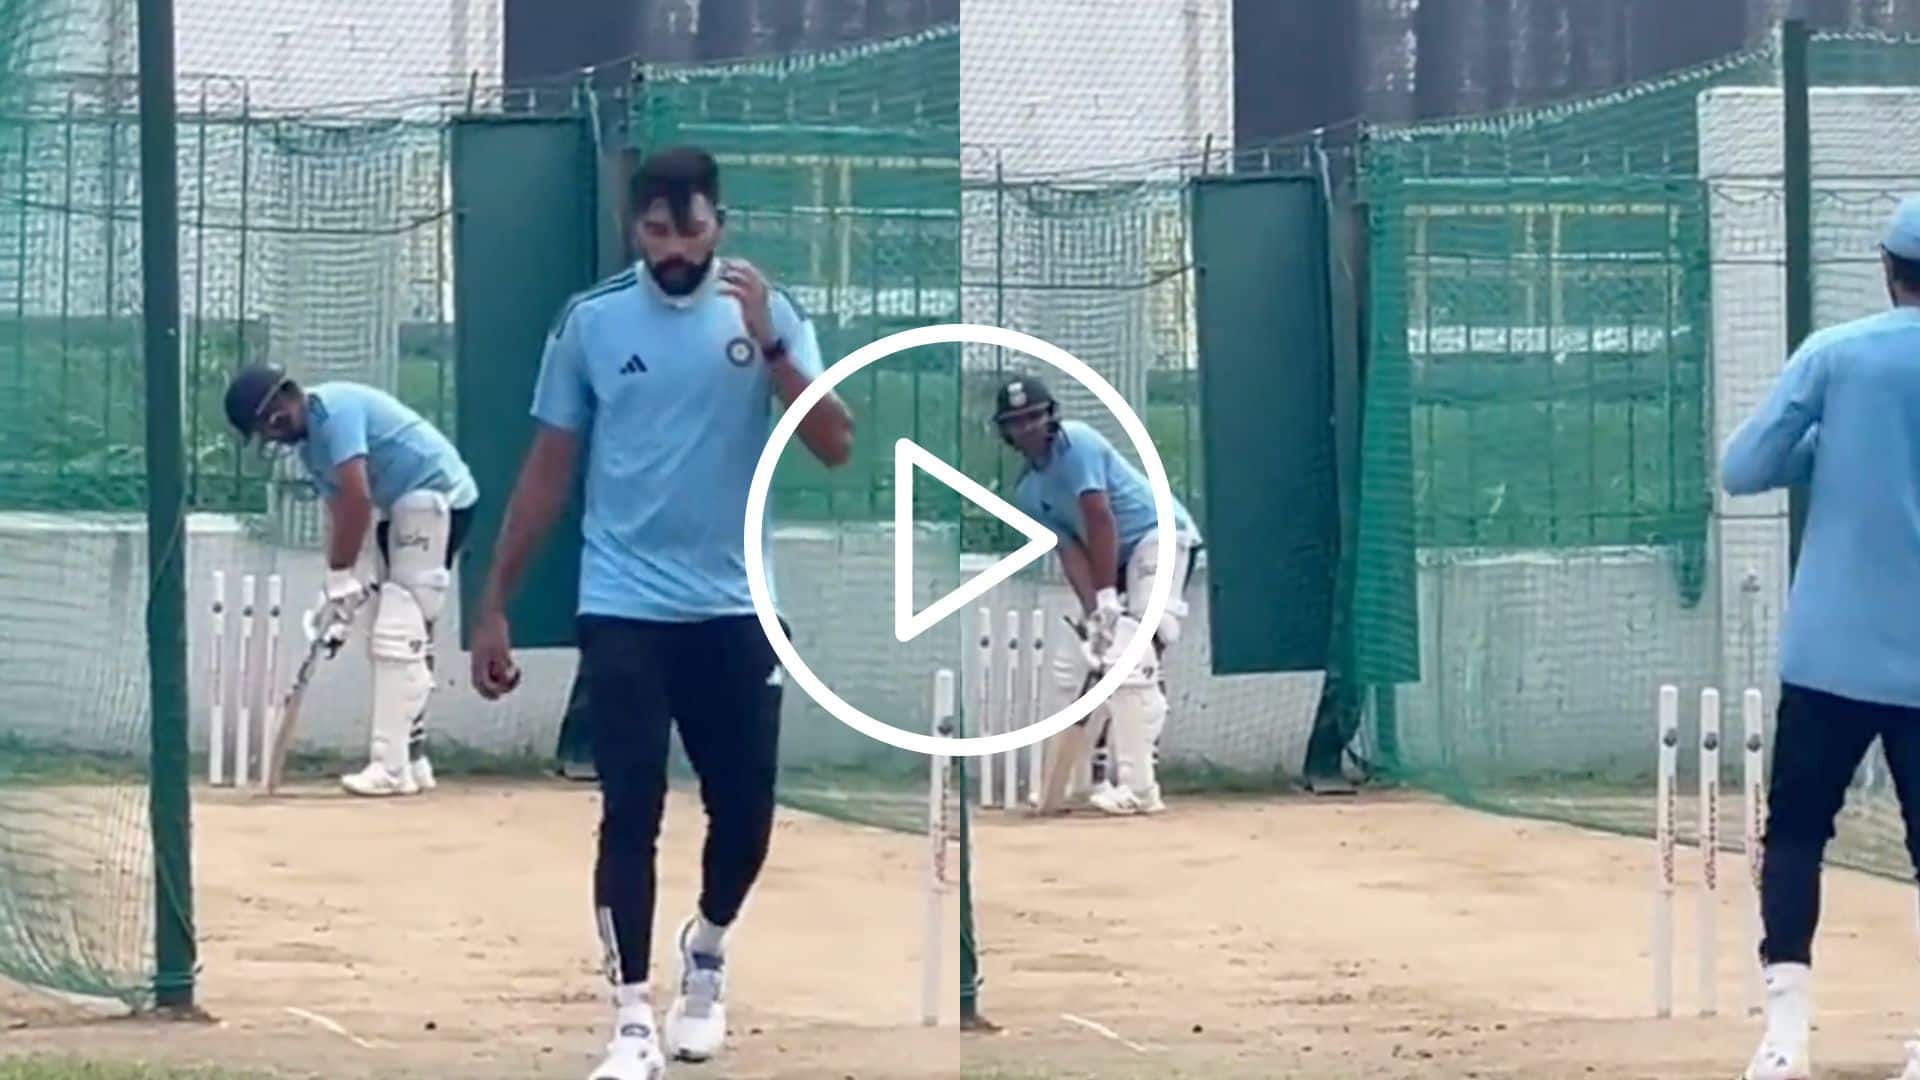 [WATCH] Rohit Sharma Bats With Cautious Approach Against Jadeja, Siraj In Nets